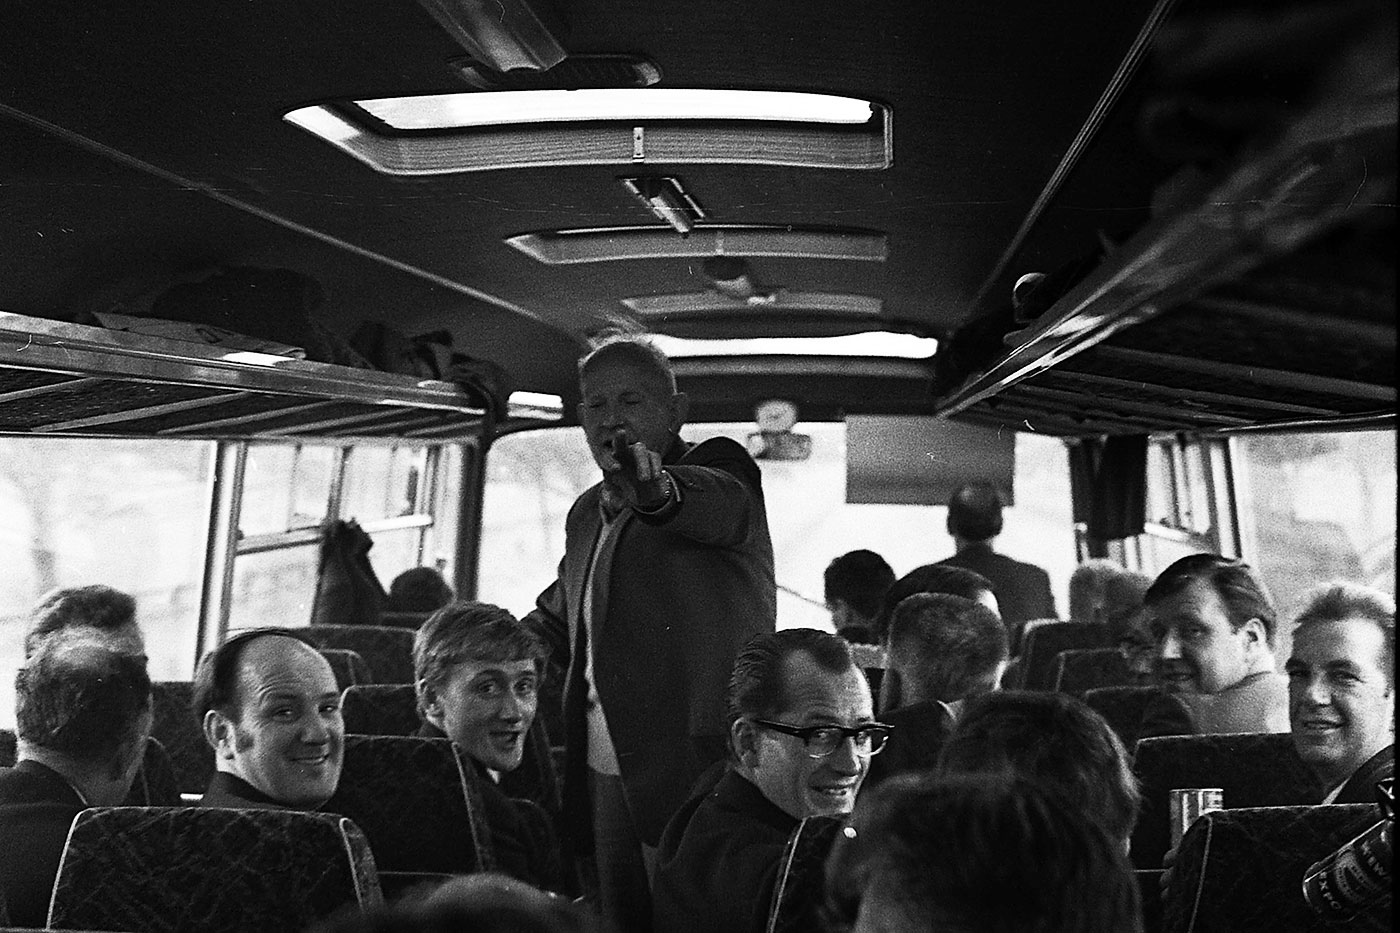 United Wire Works Outing to Newcastle  -  On board the bus to Newcastle